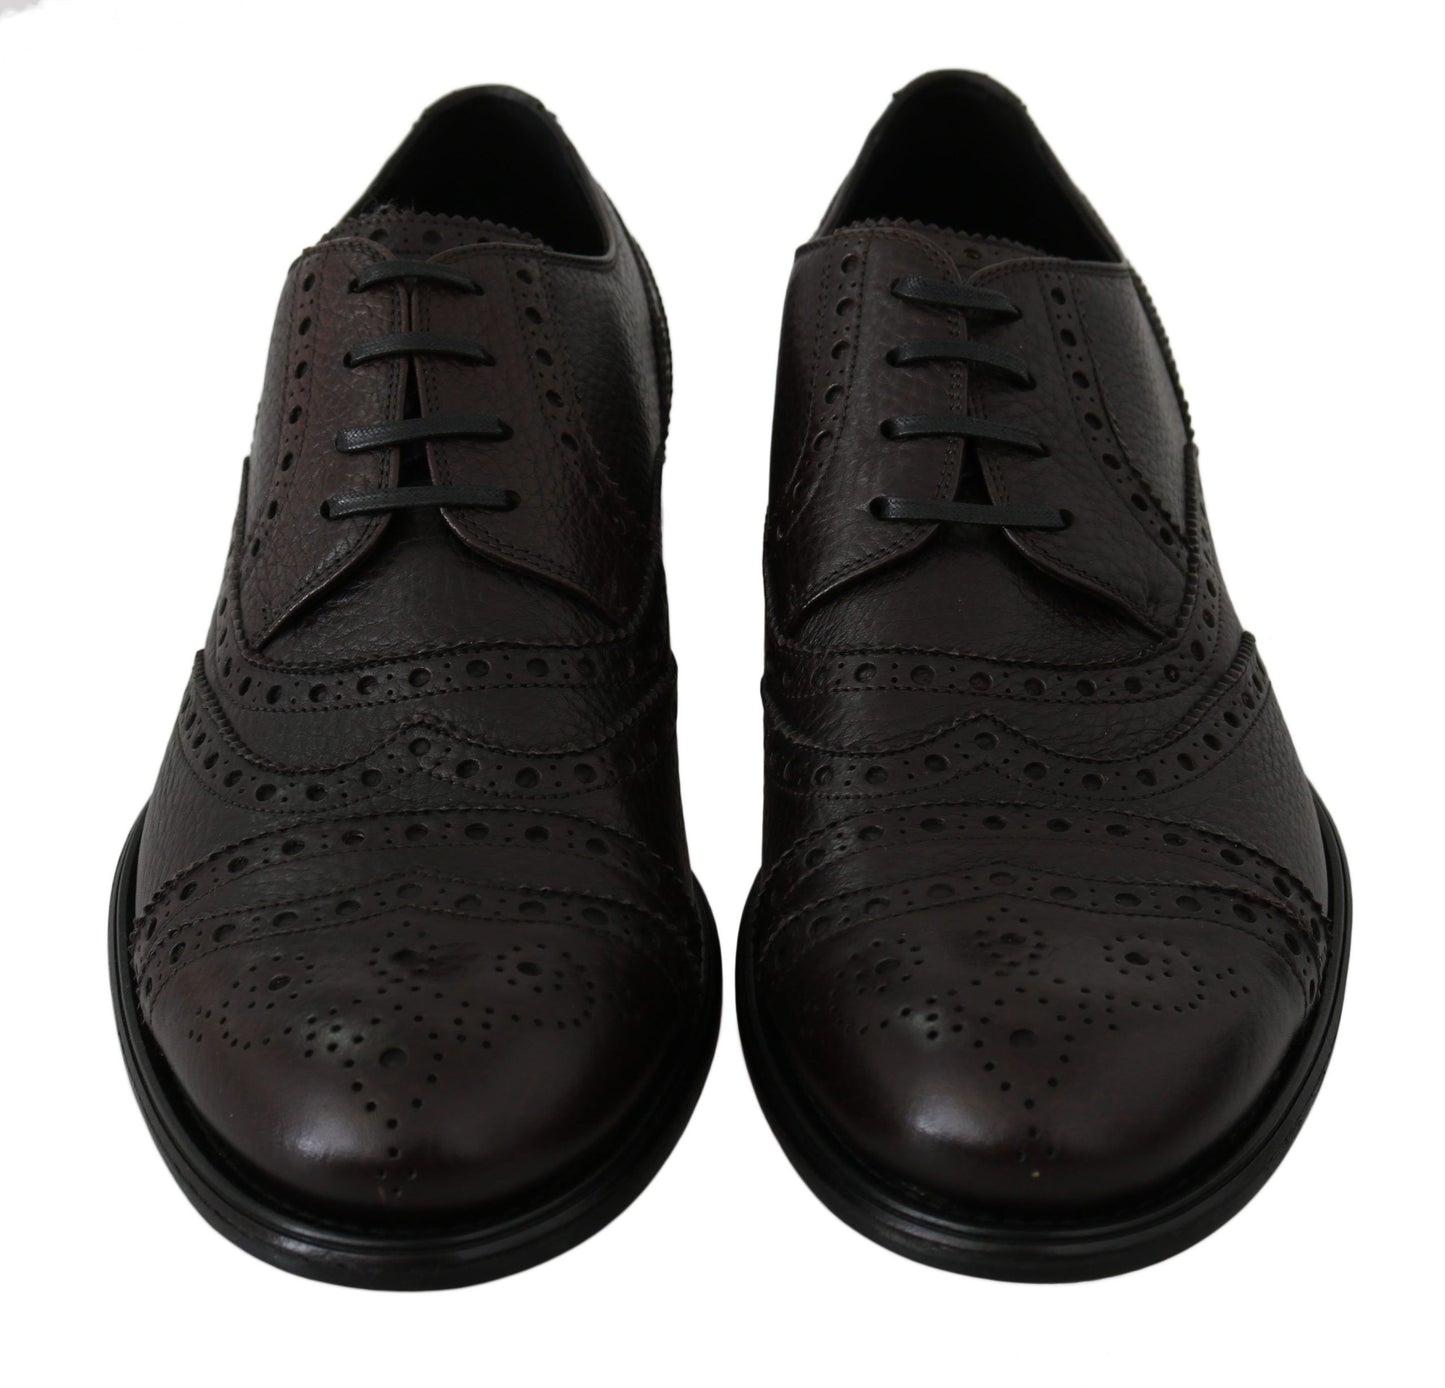 Dolce & Gabbana Brown Leather Brogue Derby Dress Shoes